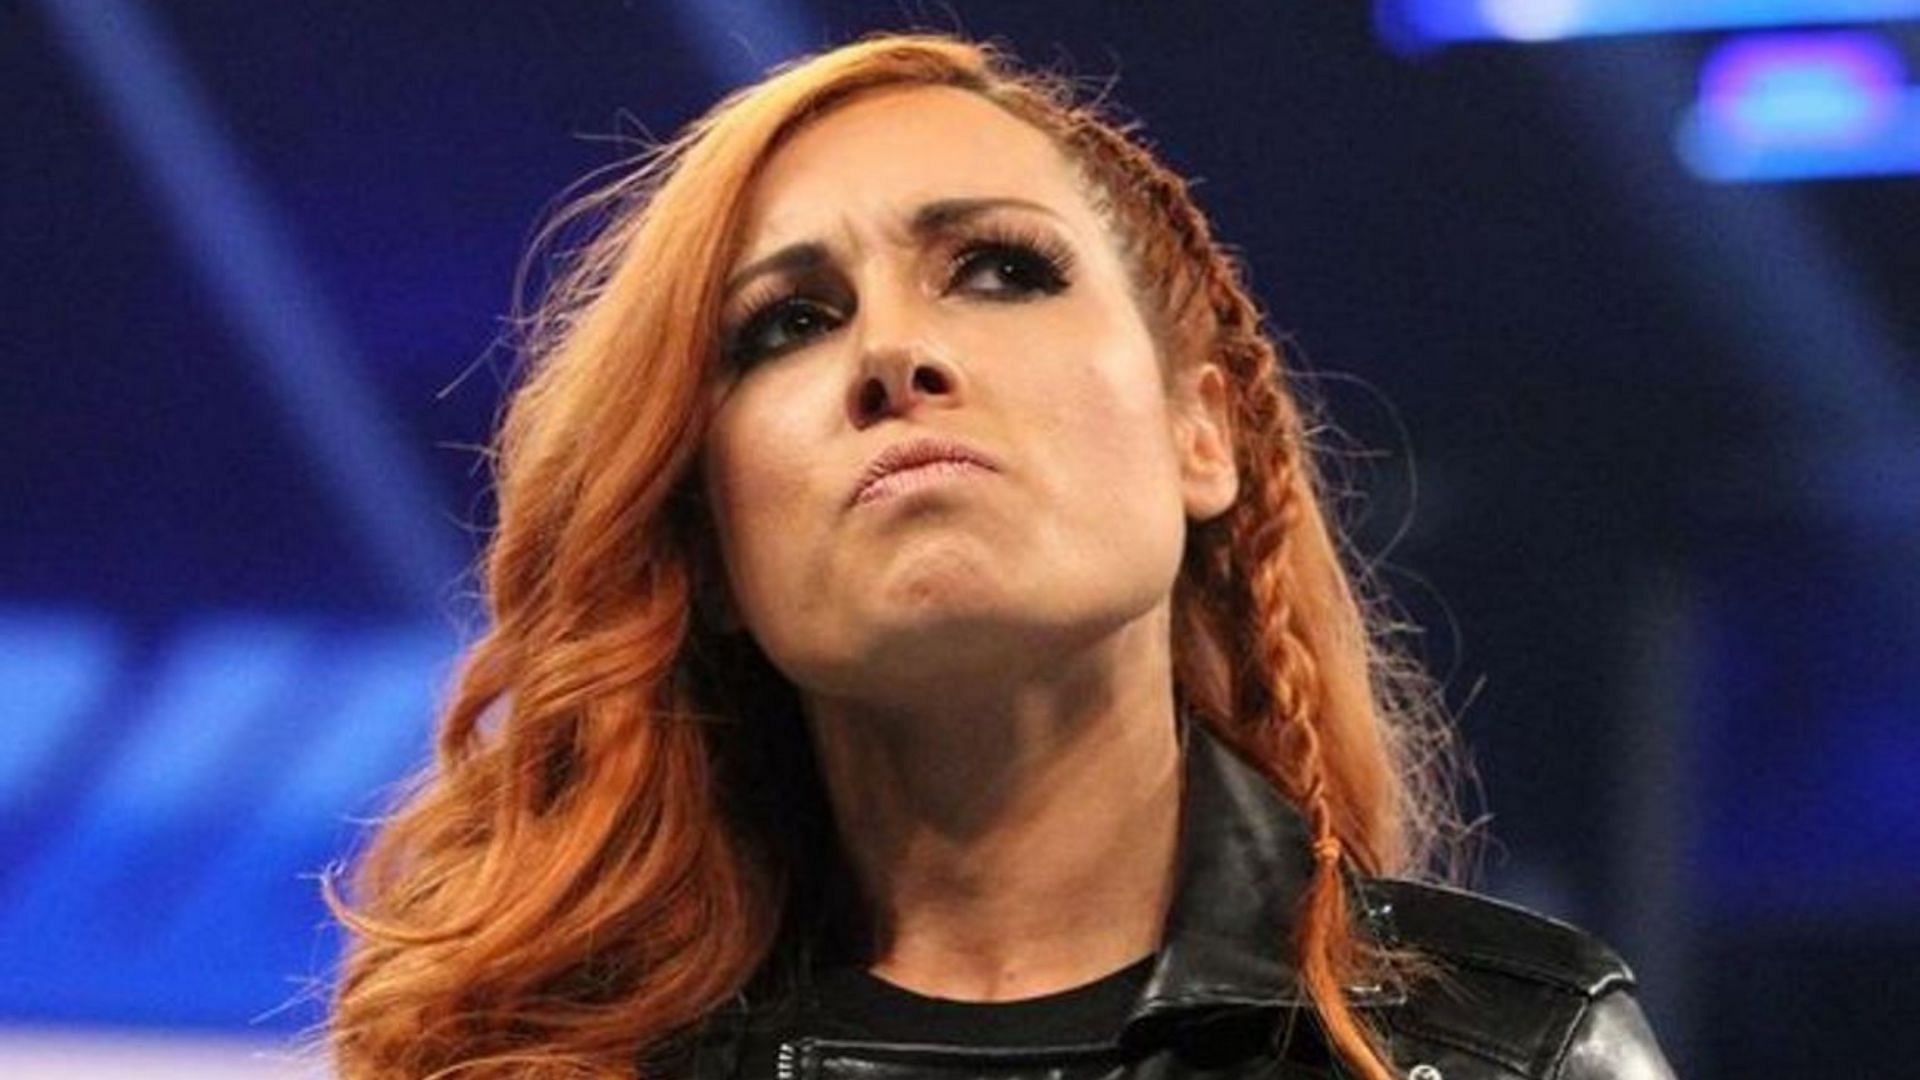 Becky Lynch is feuding with WWE Hall of Famer Trish Stratus